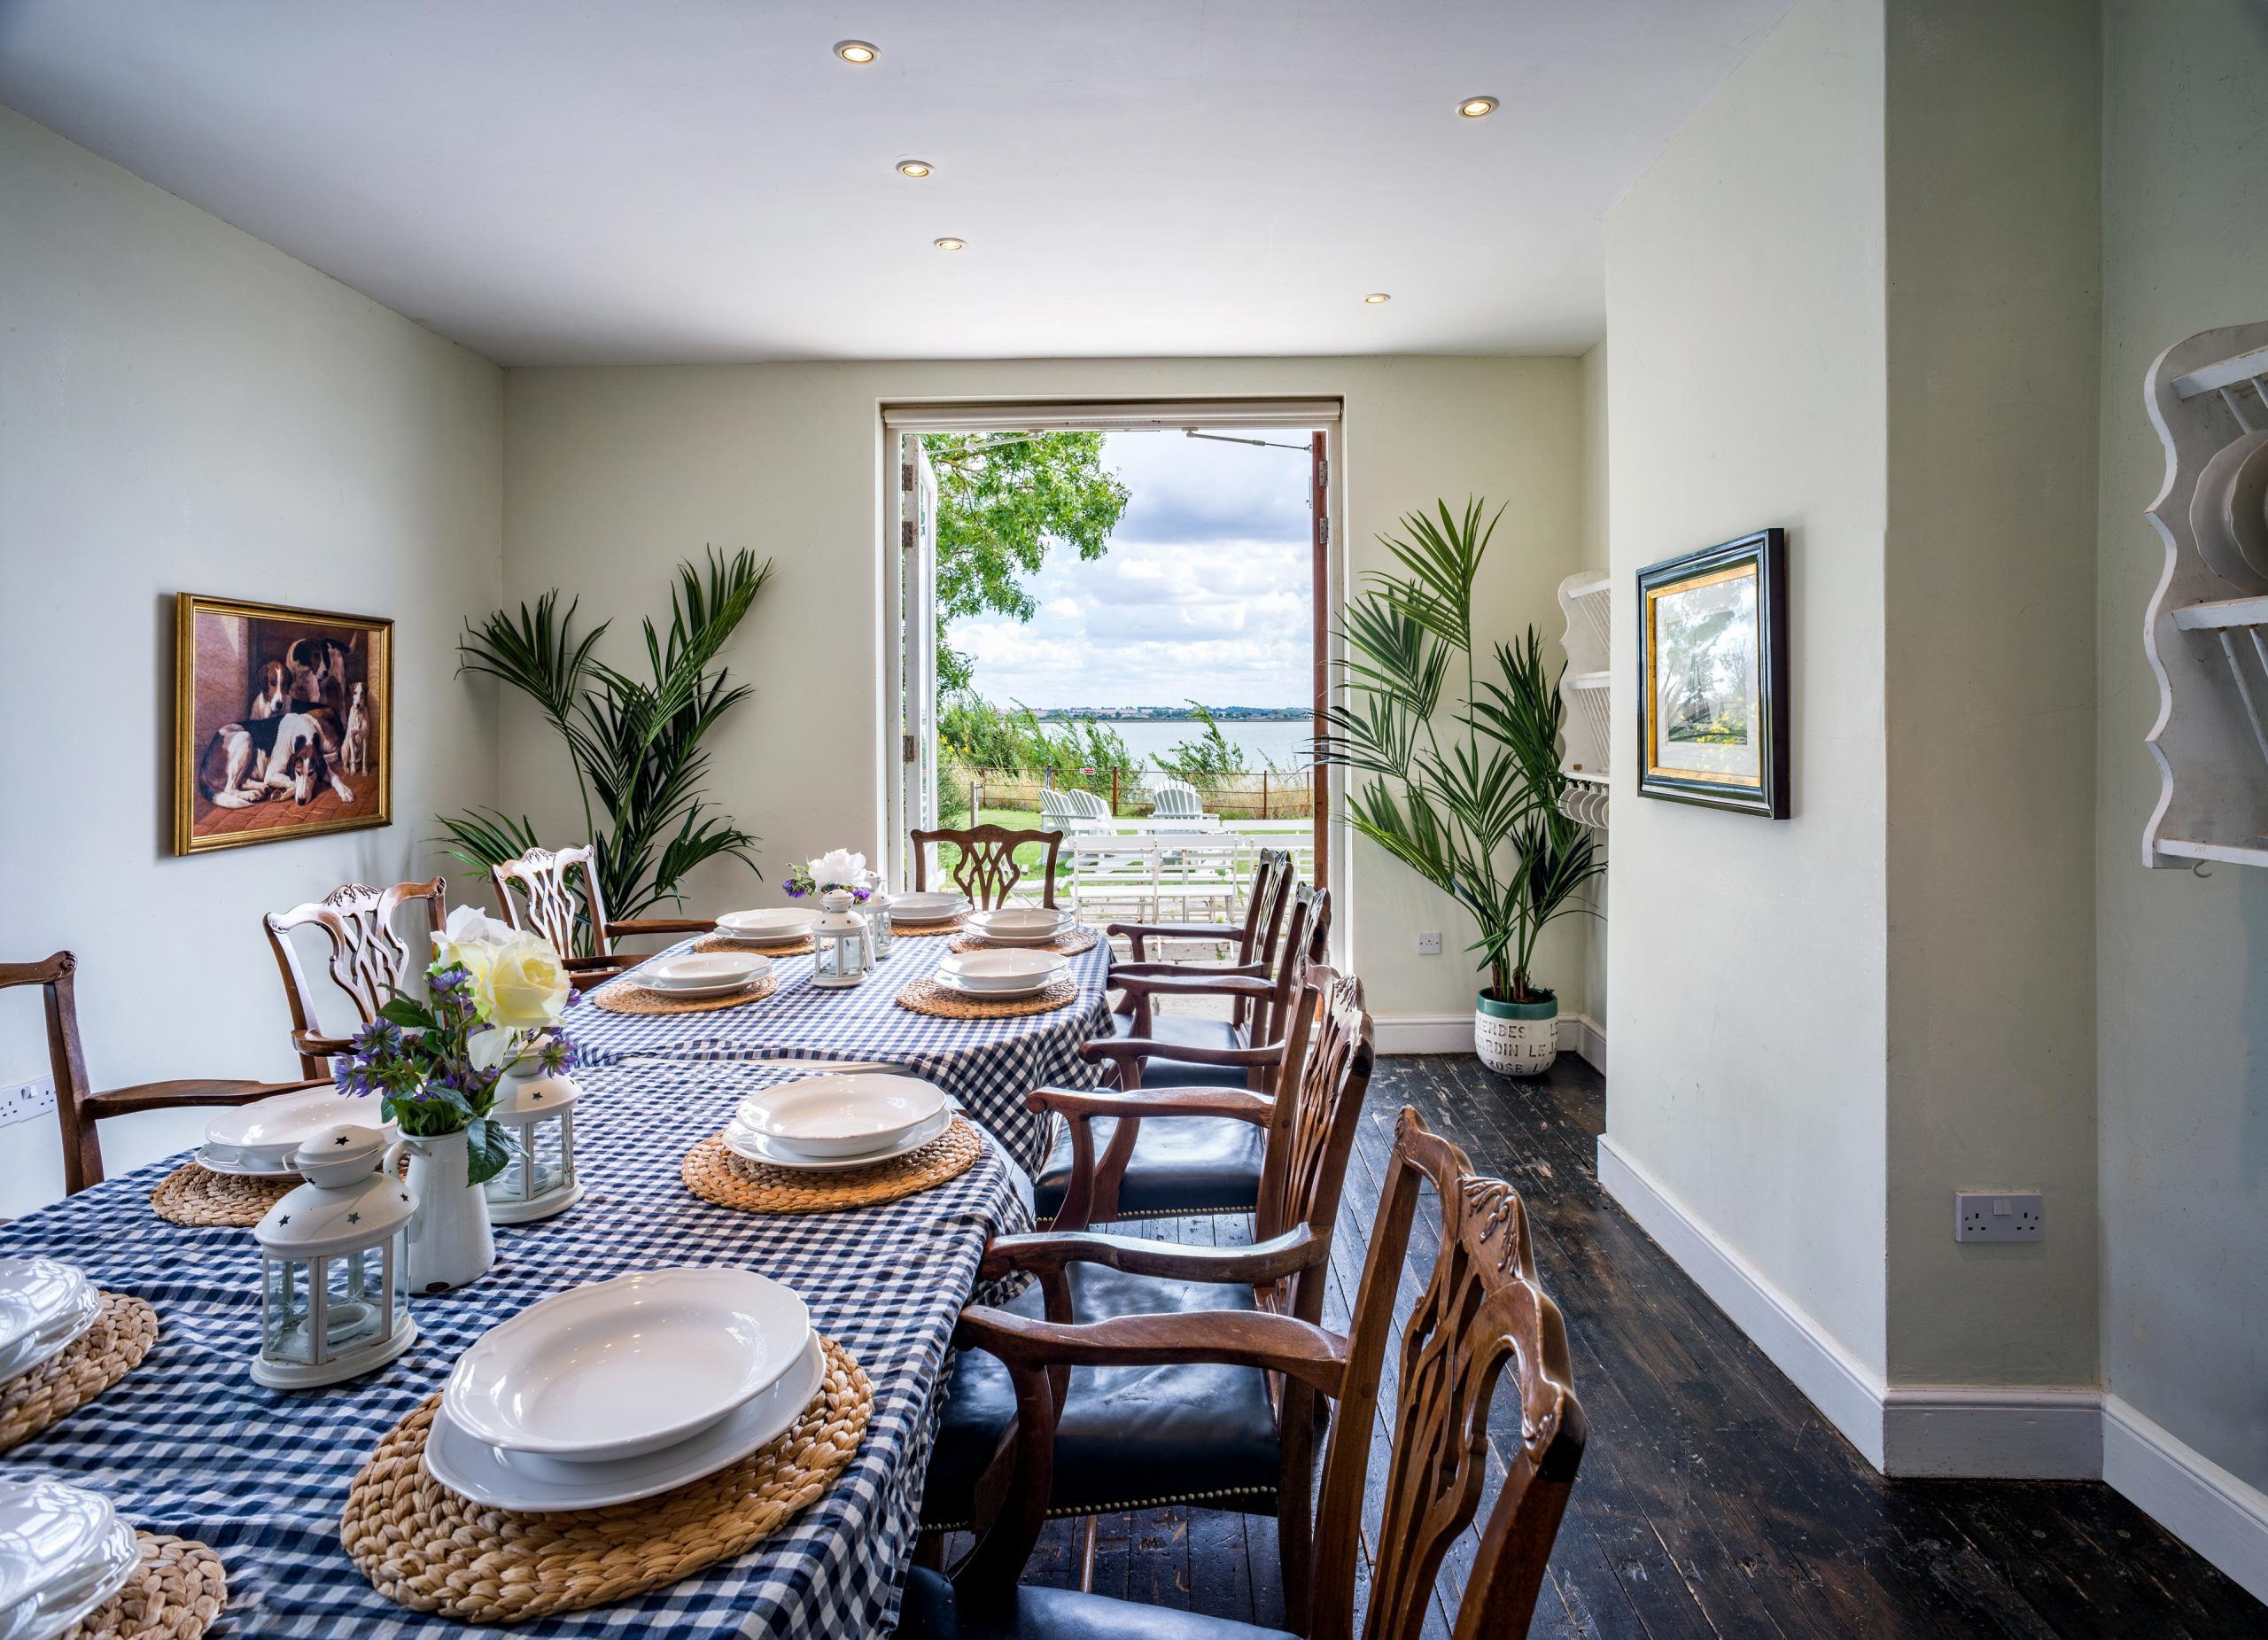 Captivating image of the breakfast room at Osea Island Resort, featuring a large wooden table adorned with flowers, plates, and tableware. French doors open to reveal a stunning view of the private beach and sea, inviting guests to enjoy a scenic breakfast experience.